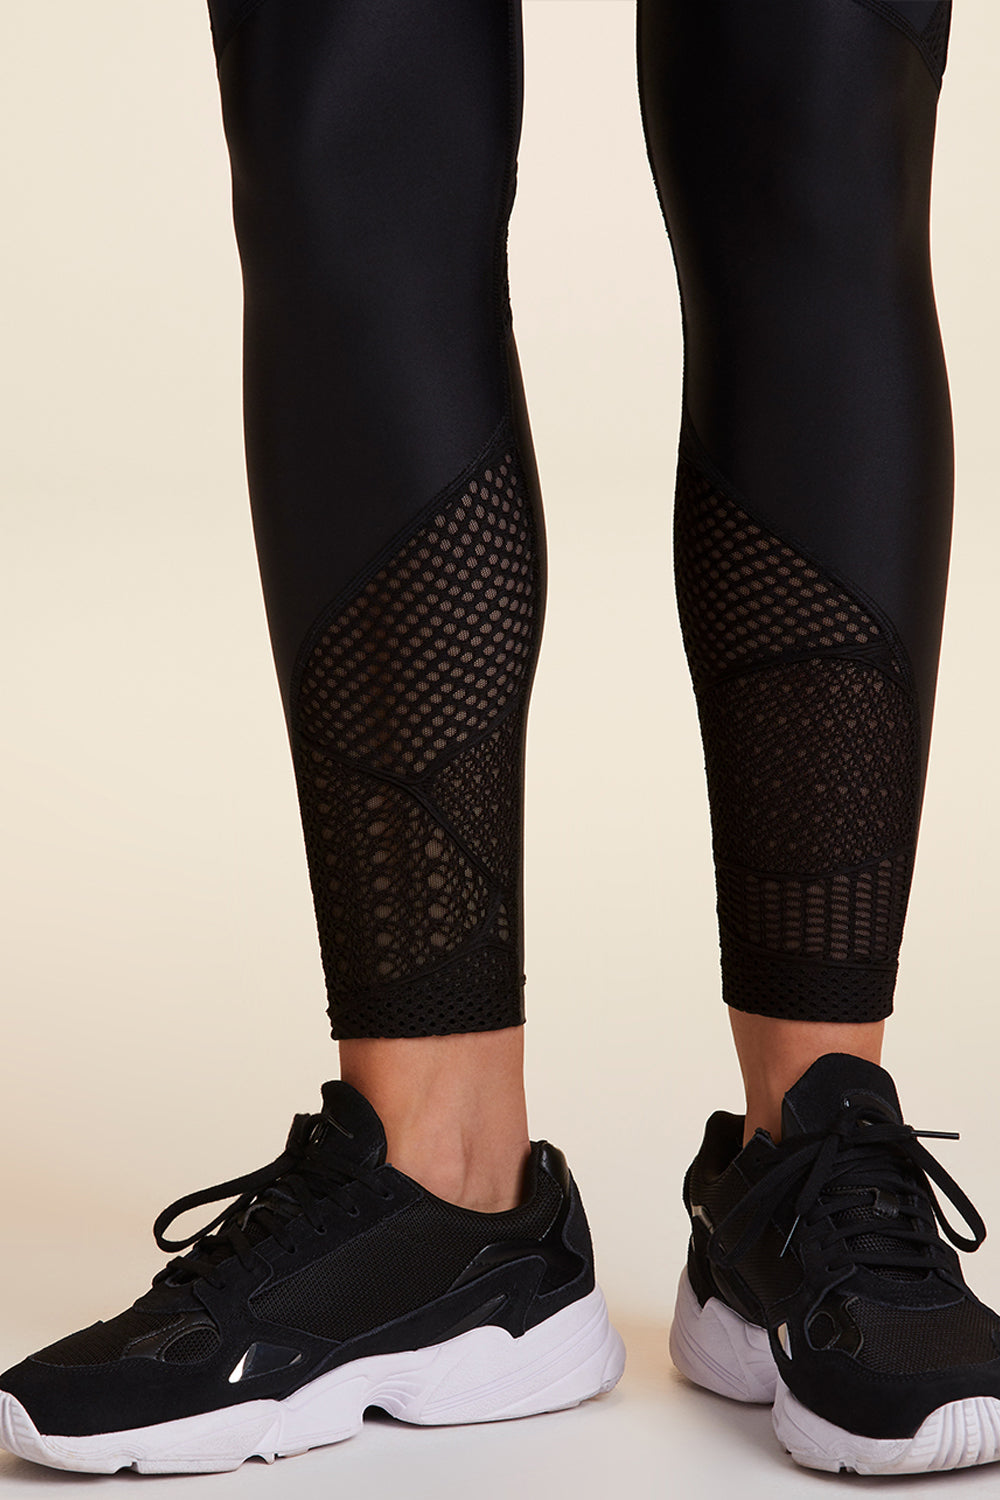 View of bottom leg detailing on Alala Luxury Women's Athleisure collage tight in black